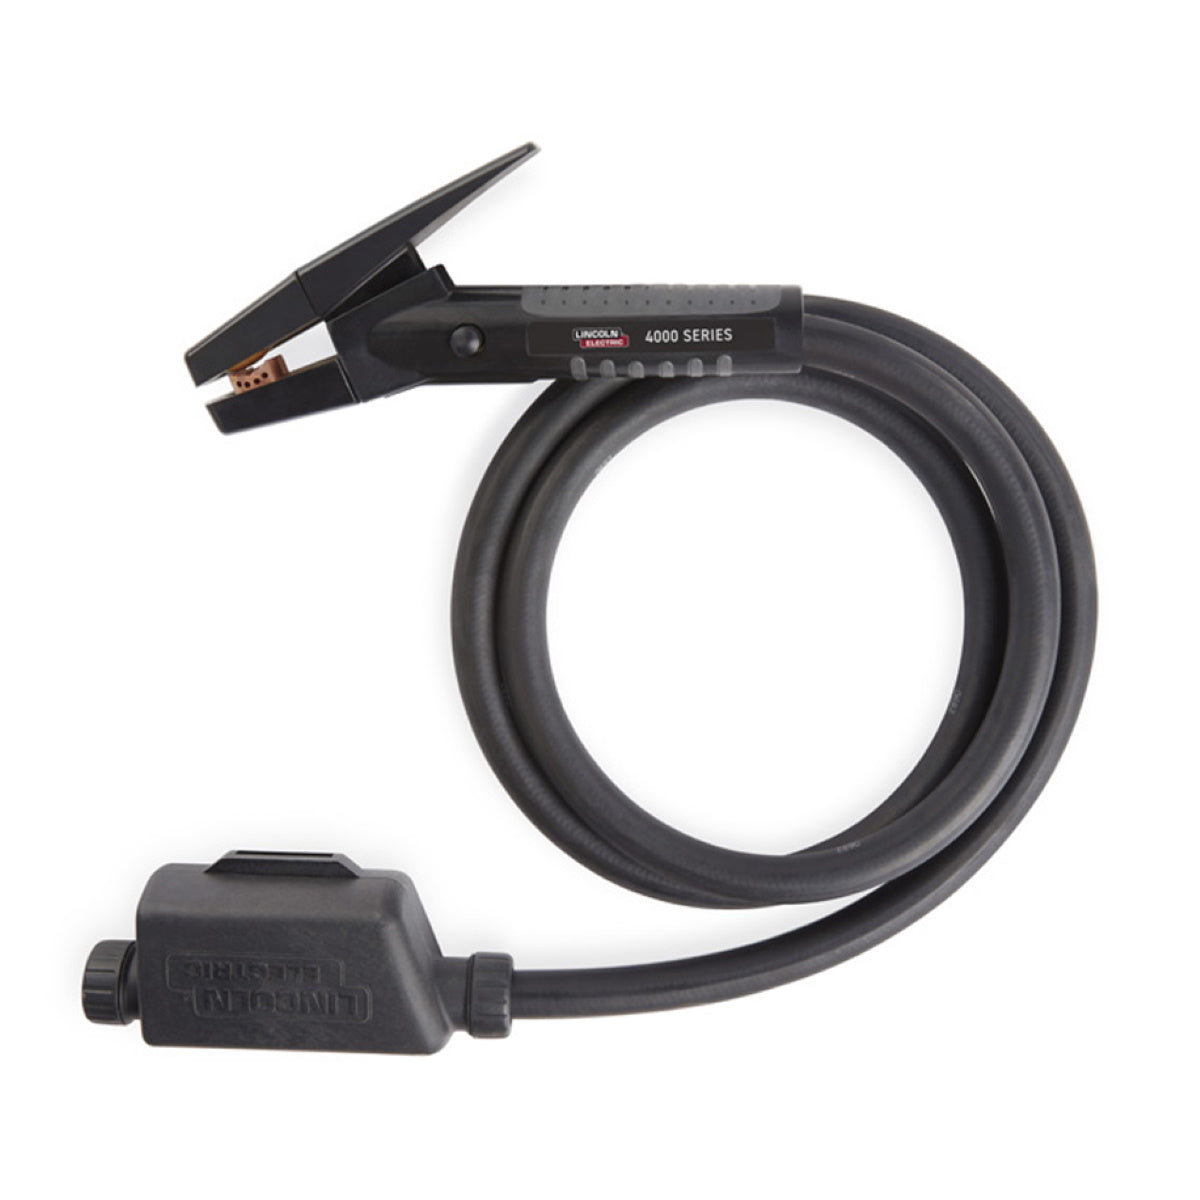 Lincoln 10ft 4000 Series Arc Gouging Torch (K4990-1)